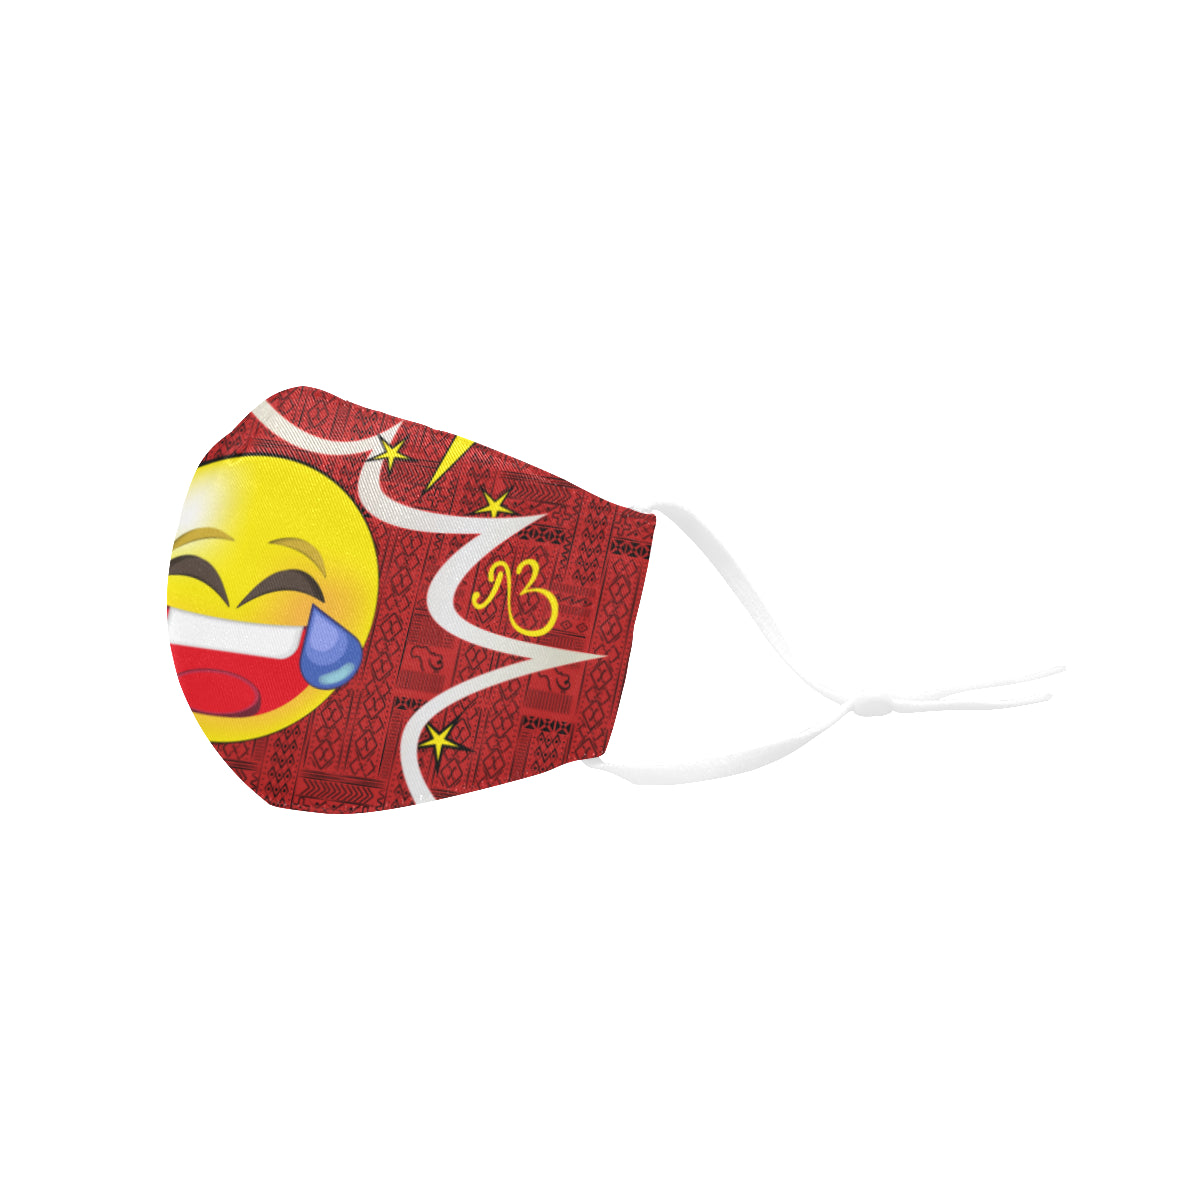 LOL Tribal Print Comic Emoji Cotton Fabric Face Mask with Filter Slot and Adjustable Strap - Non-medical use (2 Filters Included)